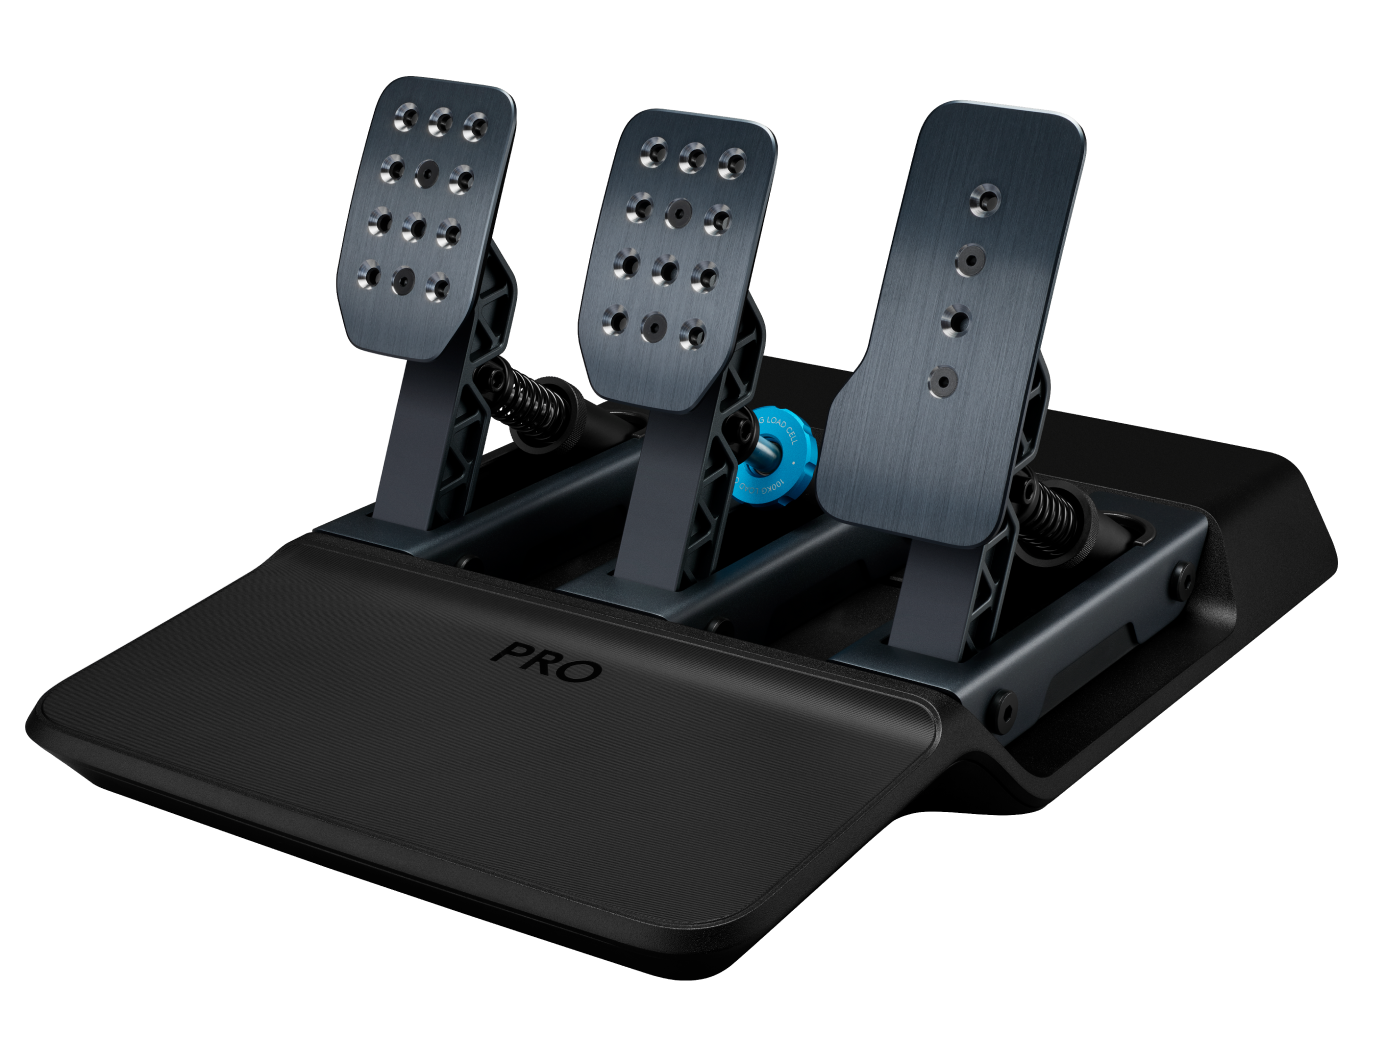 Logitech G PRO Racing Pedals - Load Cell & Customizable